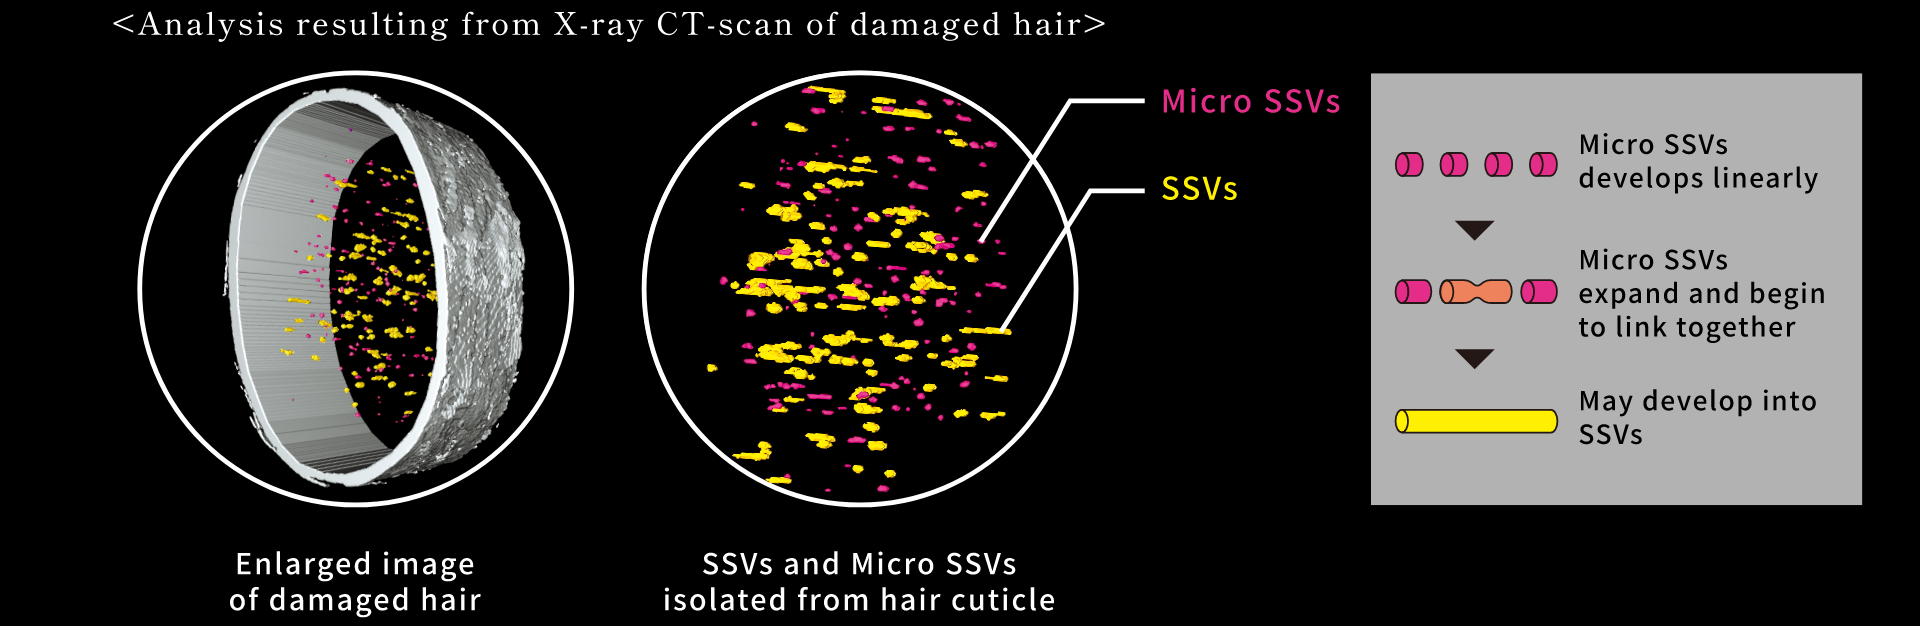 Analysis resulting from X-ray CT-scan of damaged hair